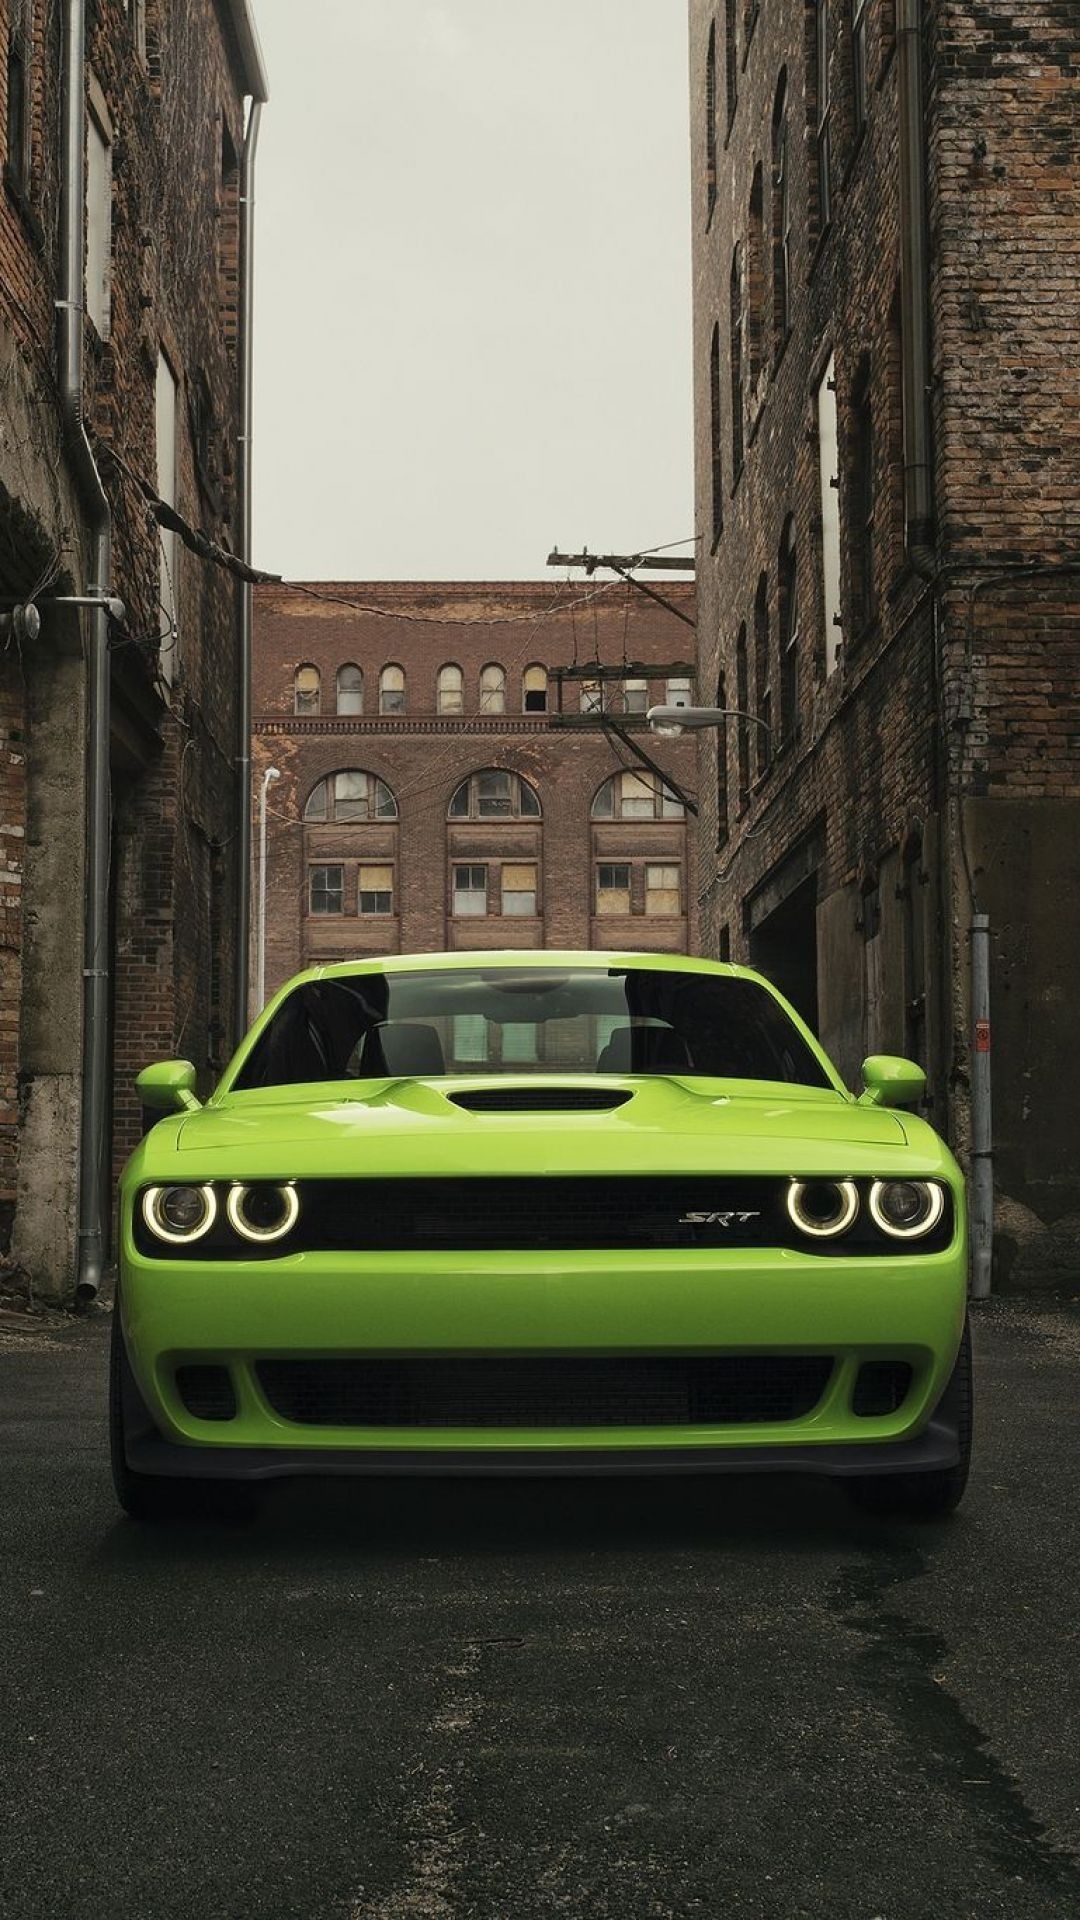 Dodge Challenger SRT Hellcat, High-definition wallpapers, Iconic muscle car, 1080x1920 Full HD Handy